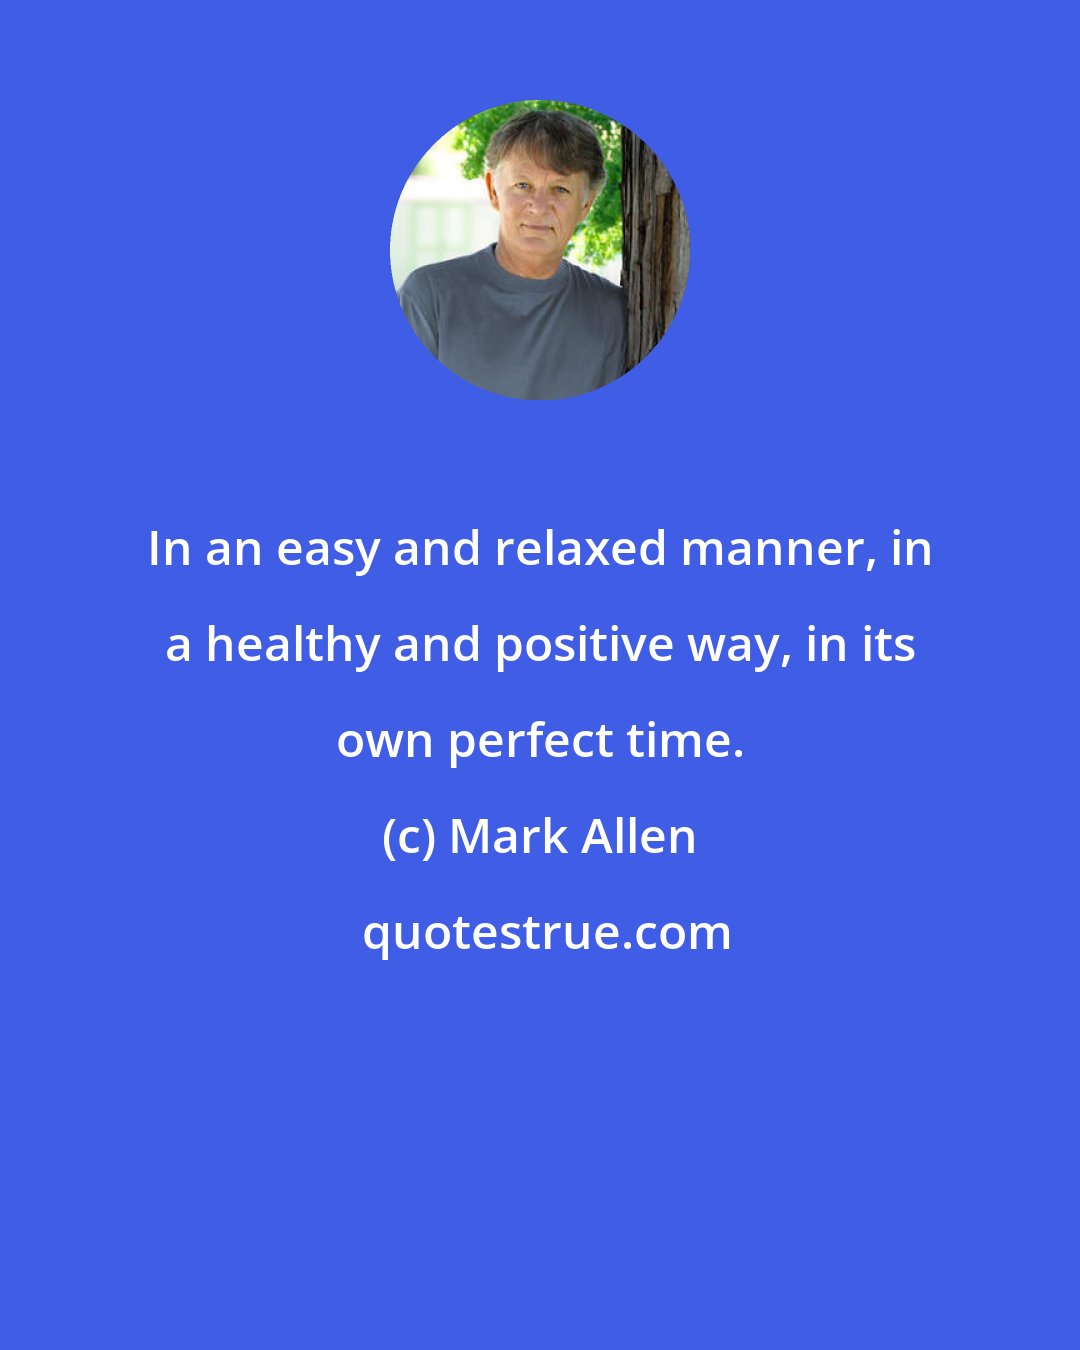 Mark Allen: In an easy and relaxed manner, in a healthy and positive way, in its own perfect time.